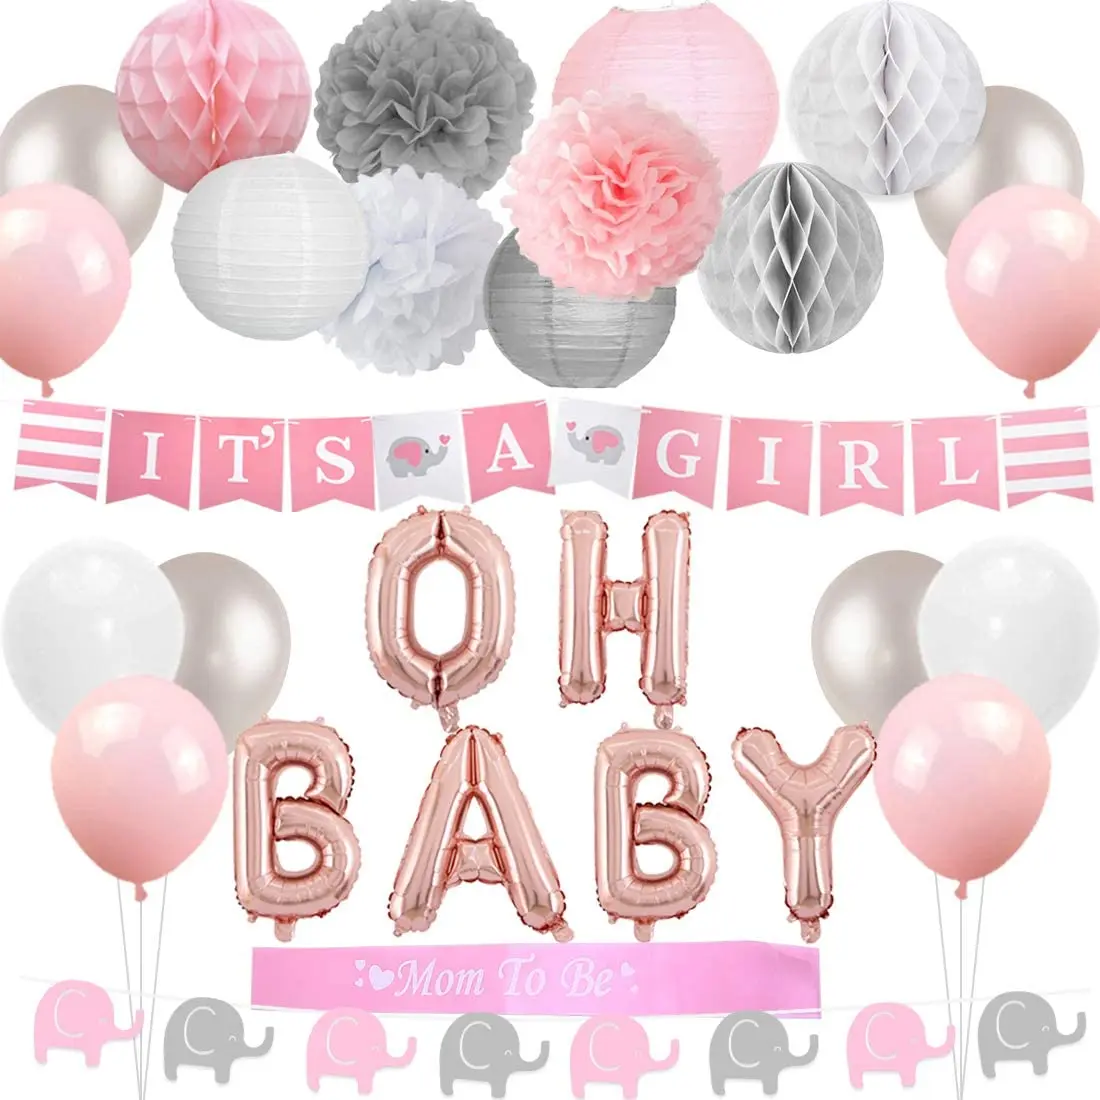 

Pink Gray and White Elephant Theme Baby Shower Decorations for Girl with Balloons Mom to Be Sash Cake Topper, Paper Pom Poms